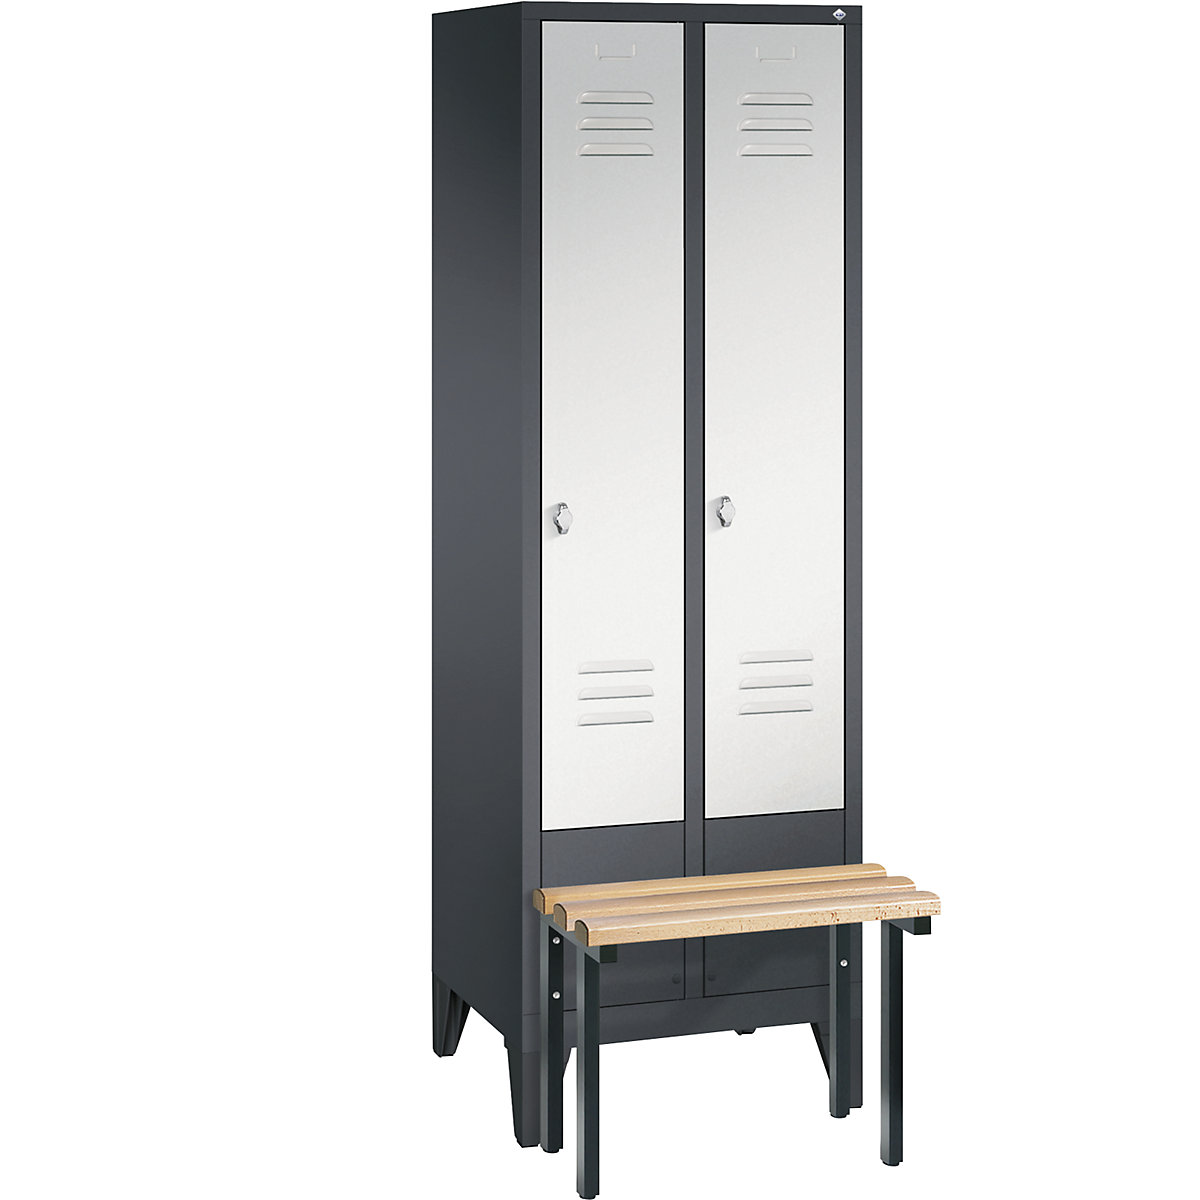 CLASSIC cloakroom locker with bench mounted in front – C+P, 2 compartments, compartment width 300 mm, black grey / light grey-11